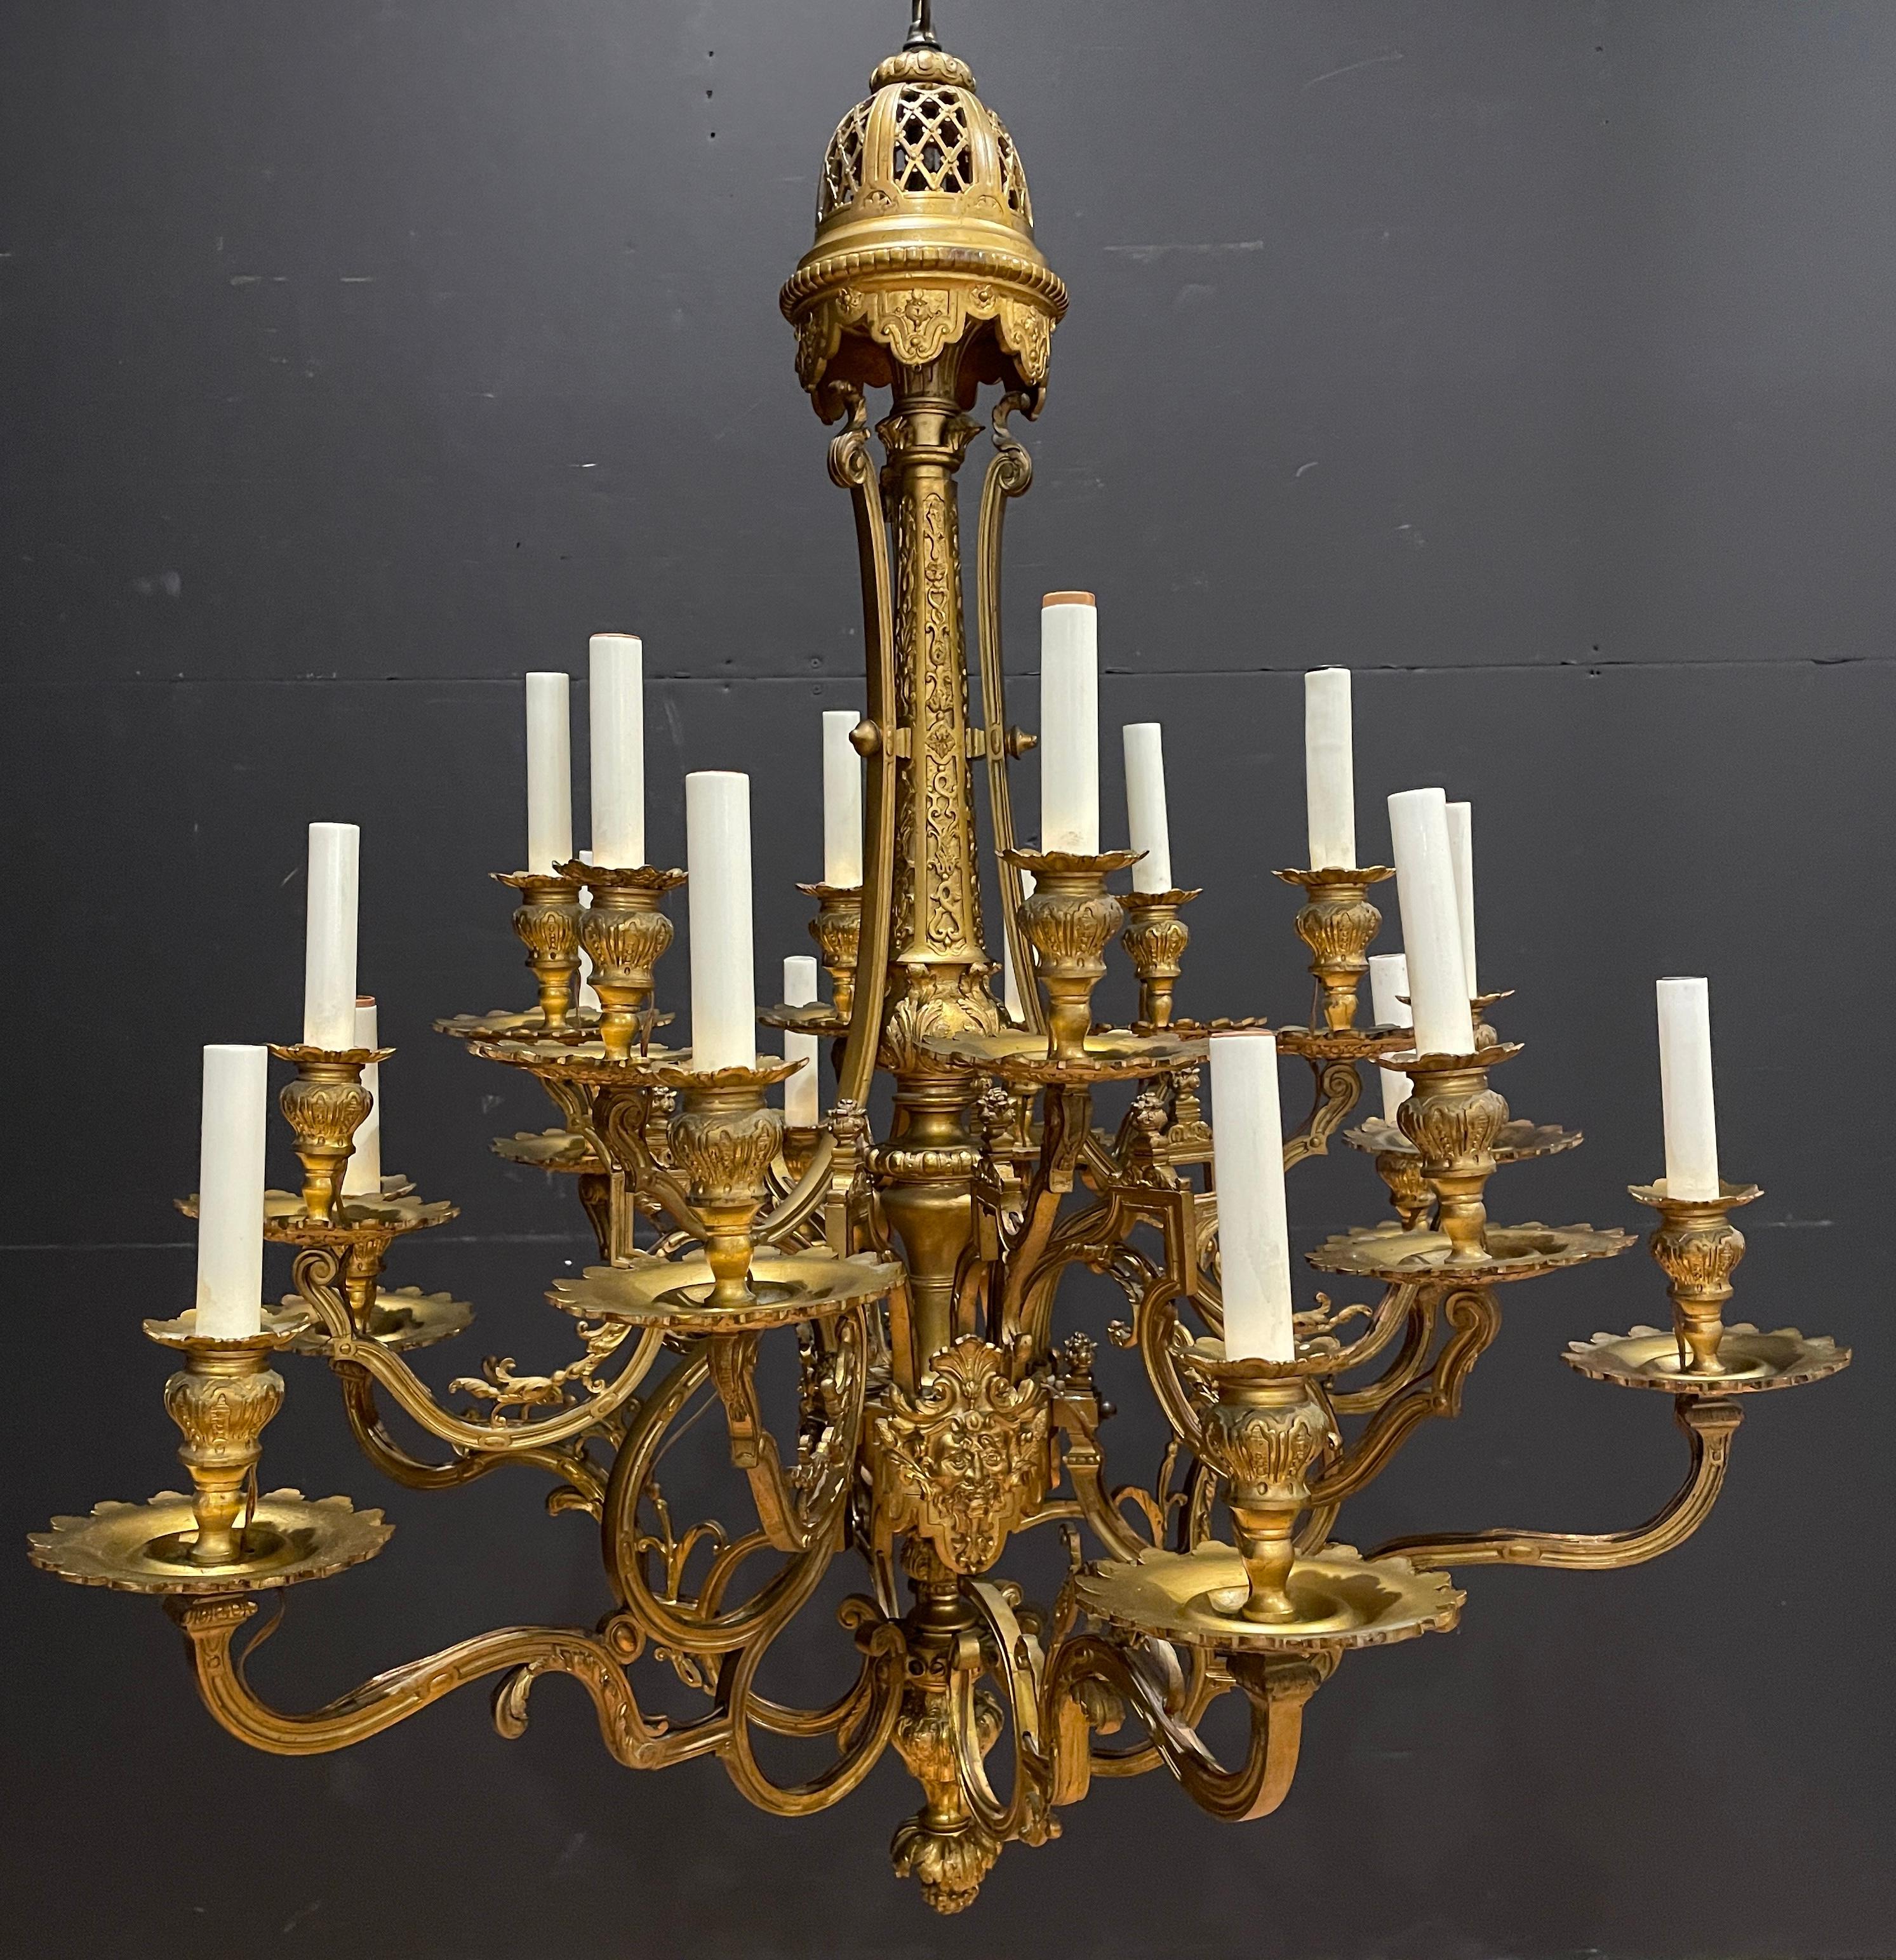 Fine quality 19th century gilt bronze 18 light chandelier. Having Baccus masks surrounding the central body, this chandelier has a Renaissance feel with some Louis XVI influence. Originally made to be fit for candles, it had later been converted and